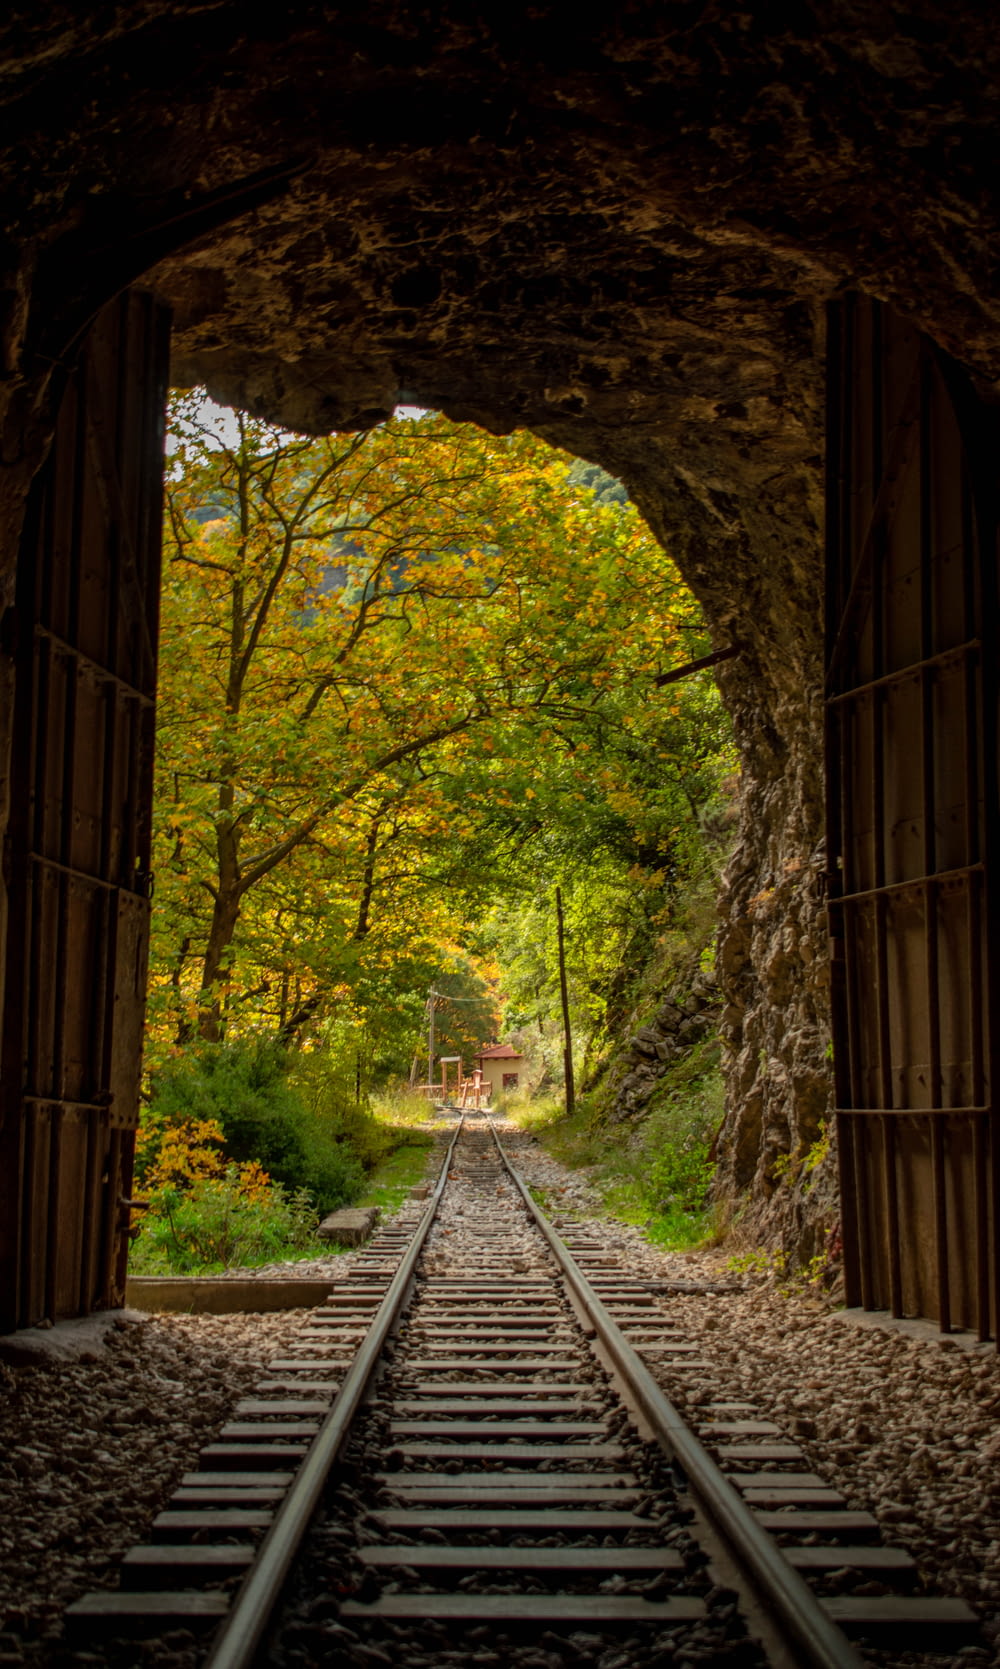 a train track going through a tunnel with trees in the background